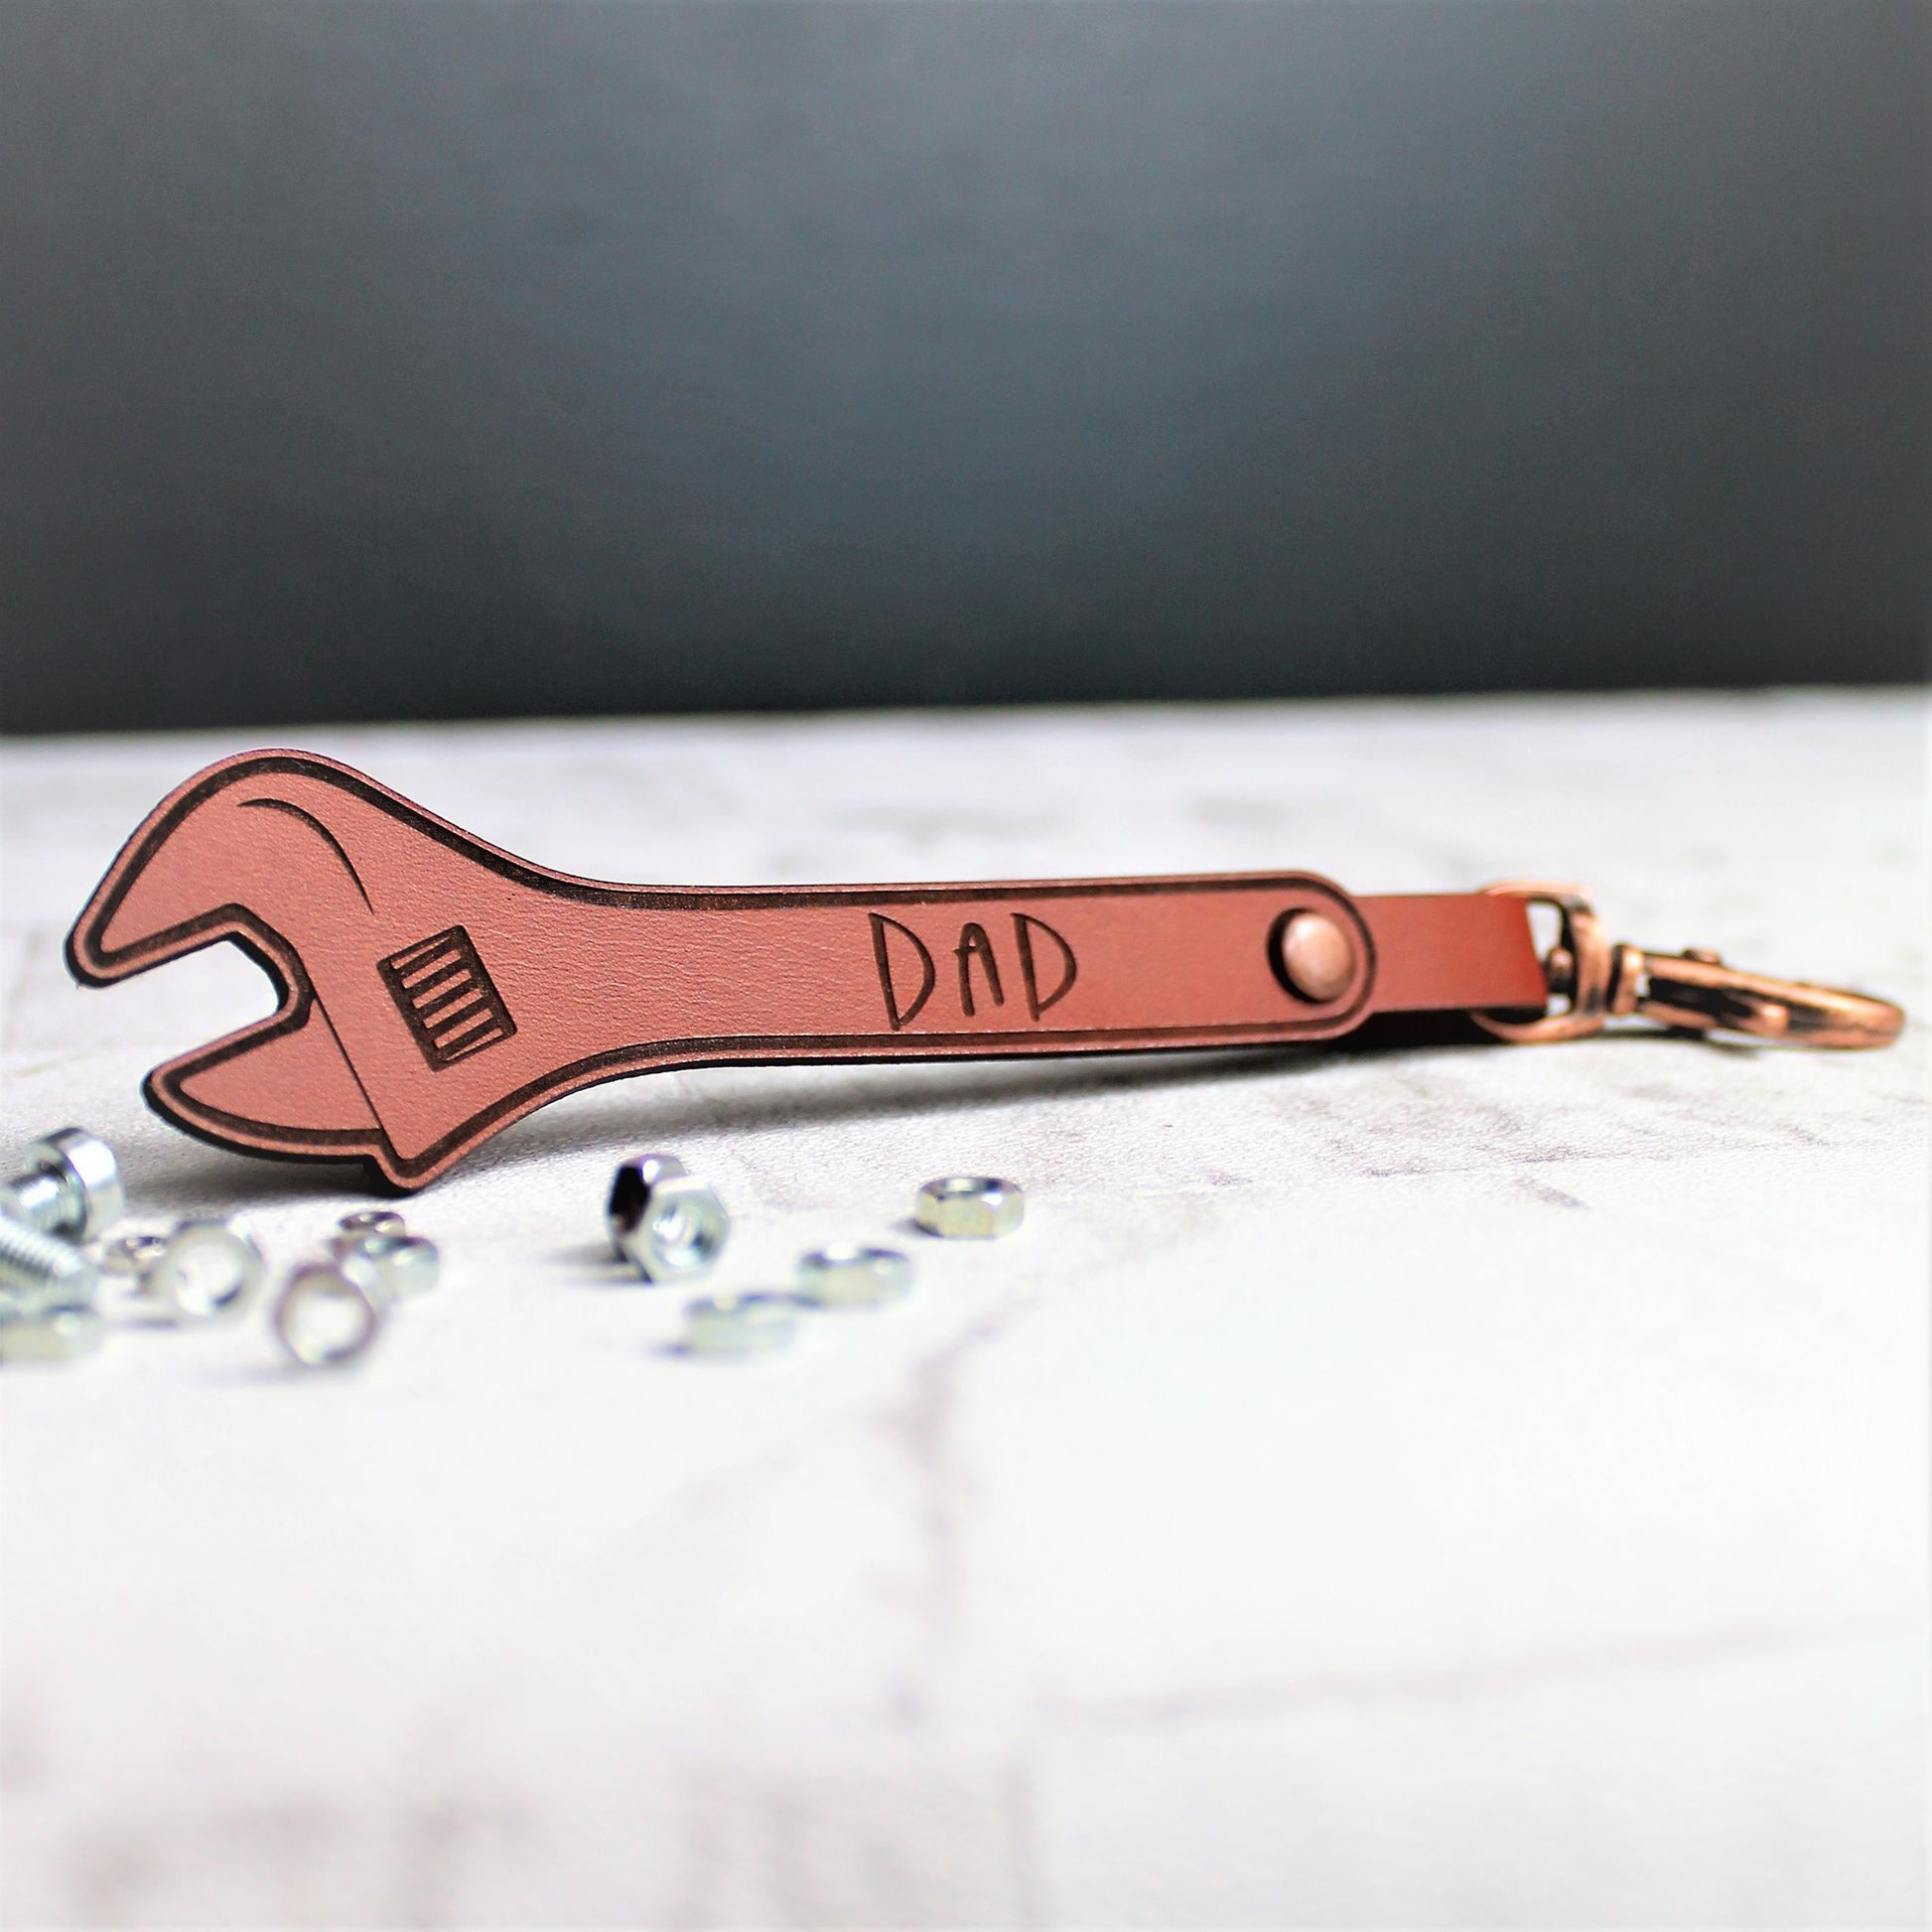 Dad engraved leather keyring in the shape of a plumbers wrench with copper clasp